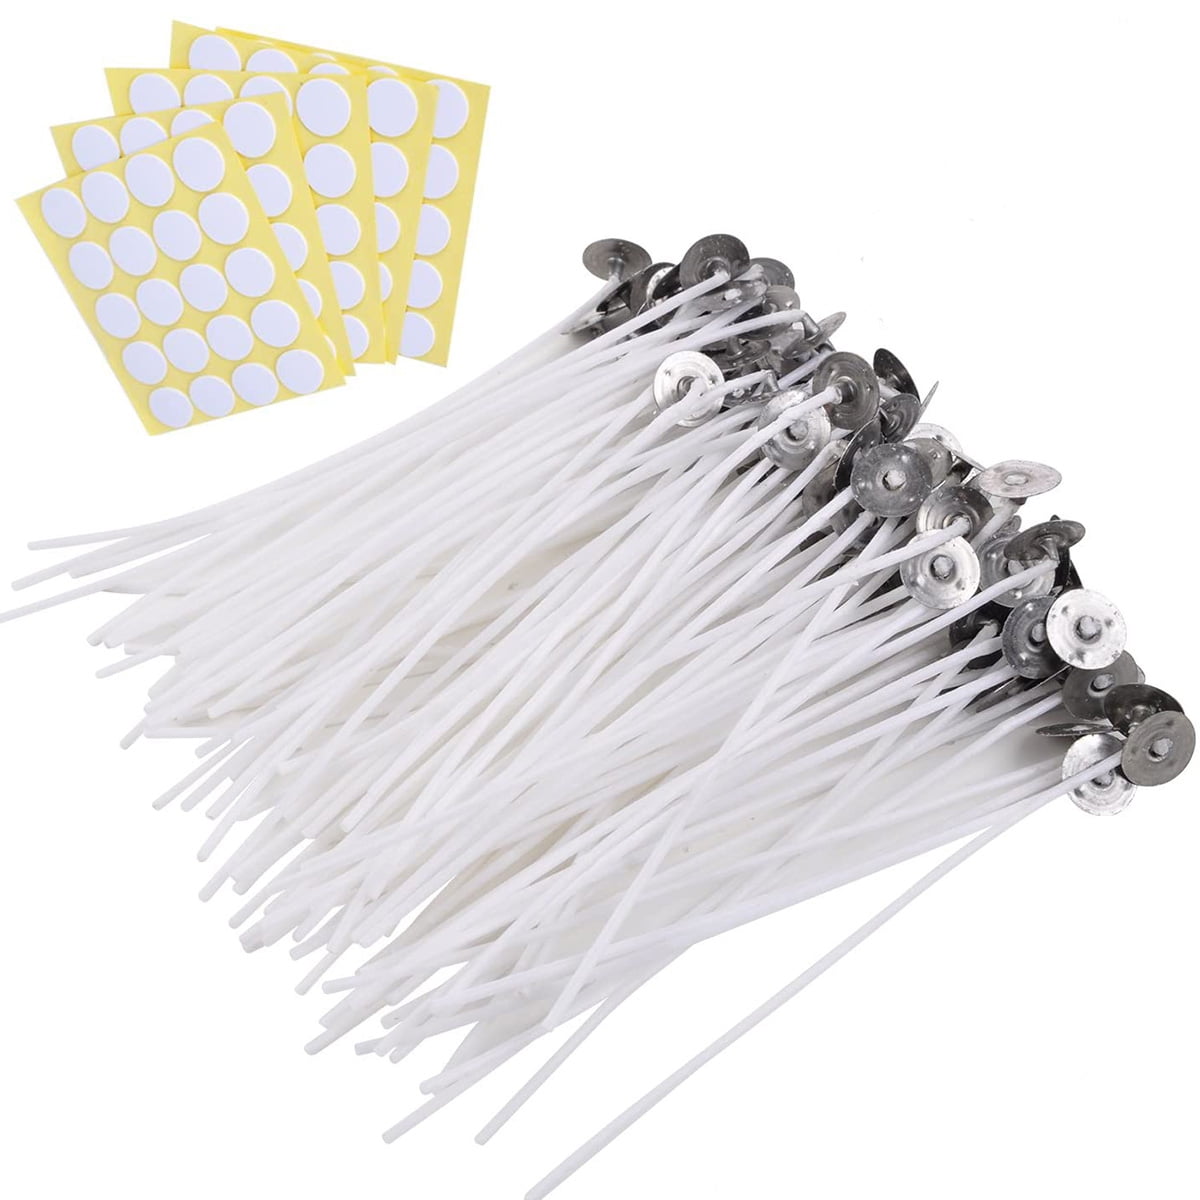 EricX Light 100 Piece Cotton Candle Wick 6 Pre-Waxed for Candle Making,Candle  DIY